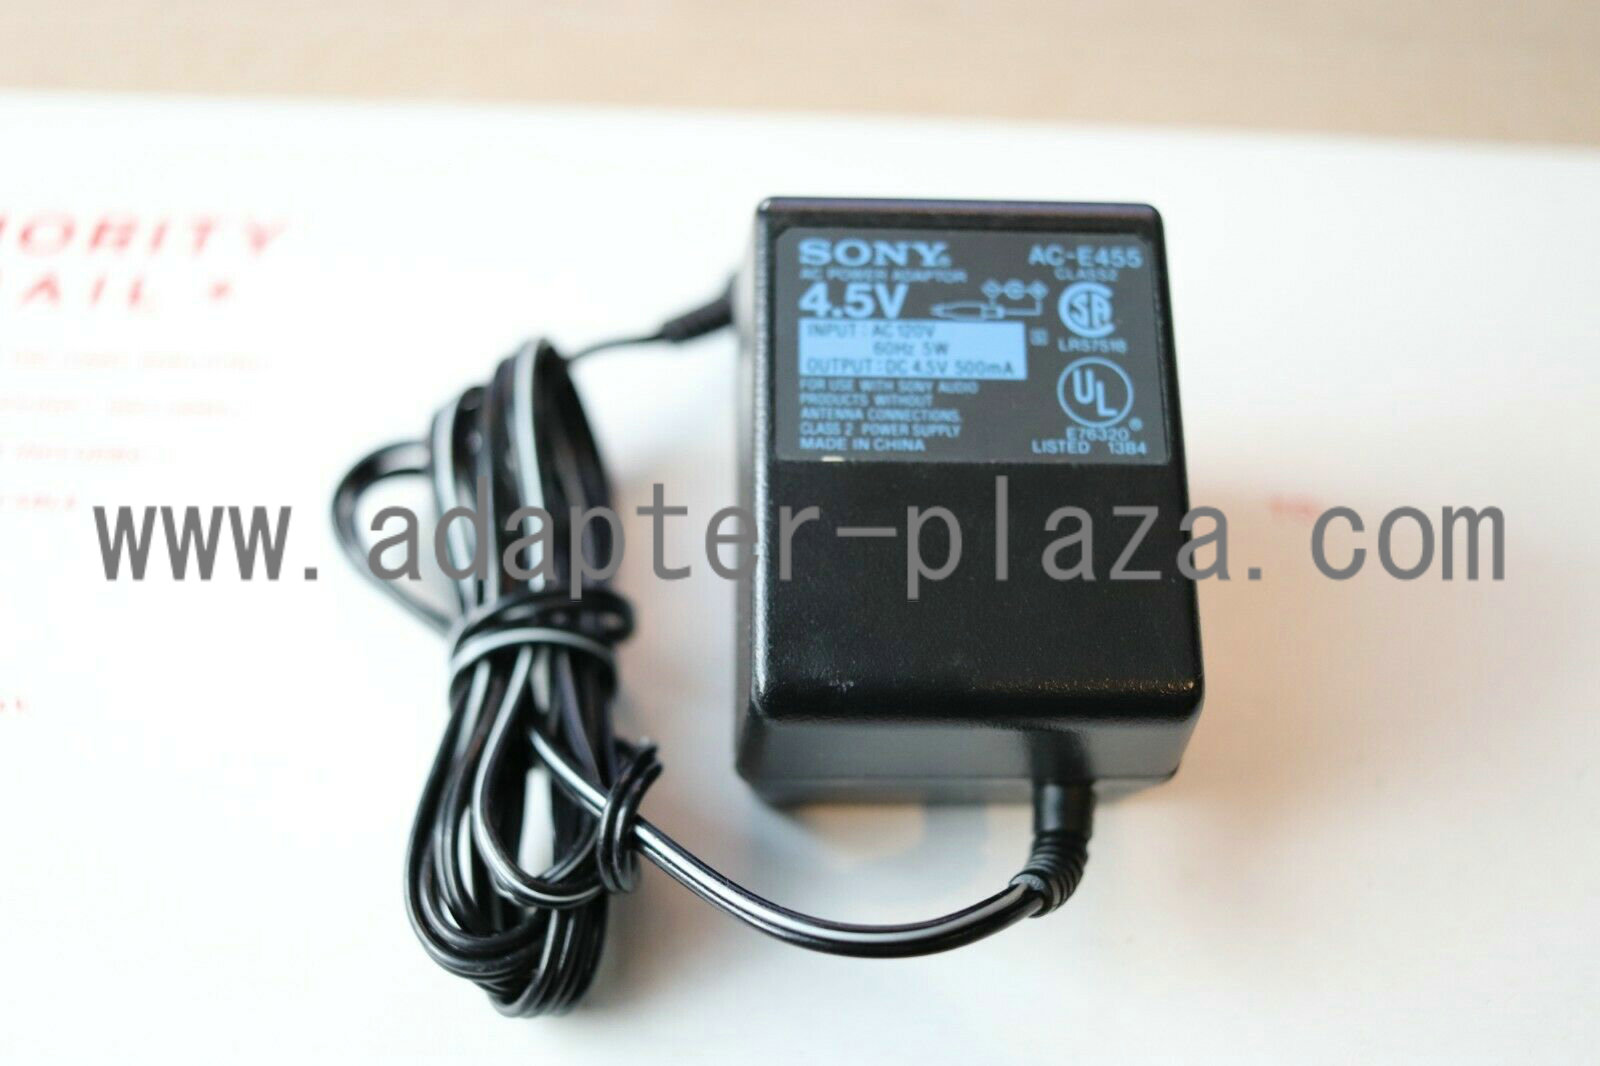 New 4.5VDC 500mA Sony AC-E455A AC Power Adapter Charger For sony audio